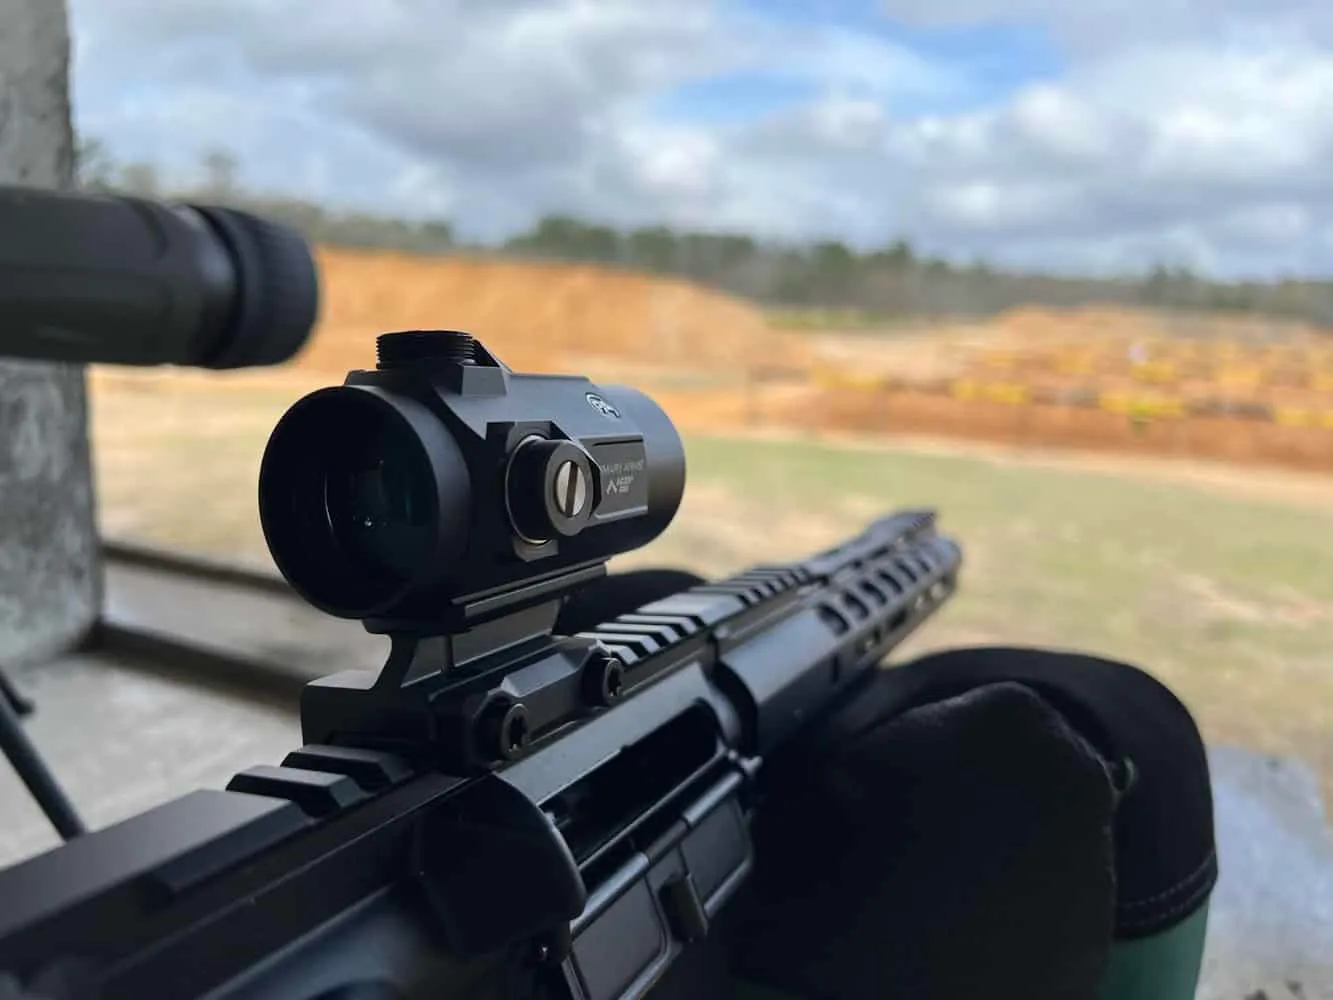 Primary Arms SLx Microdot 25 Gen 2 mounted on ar pistol